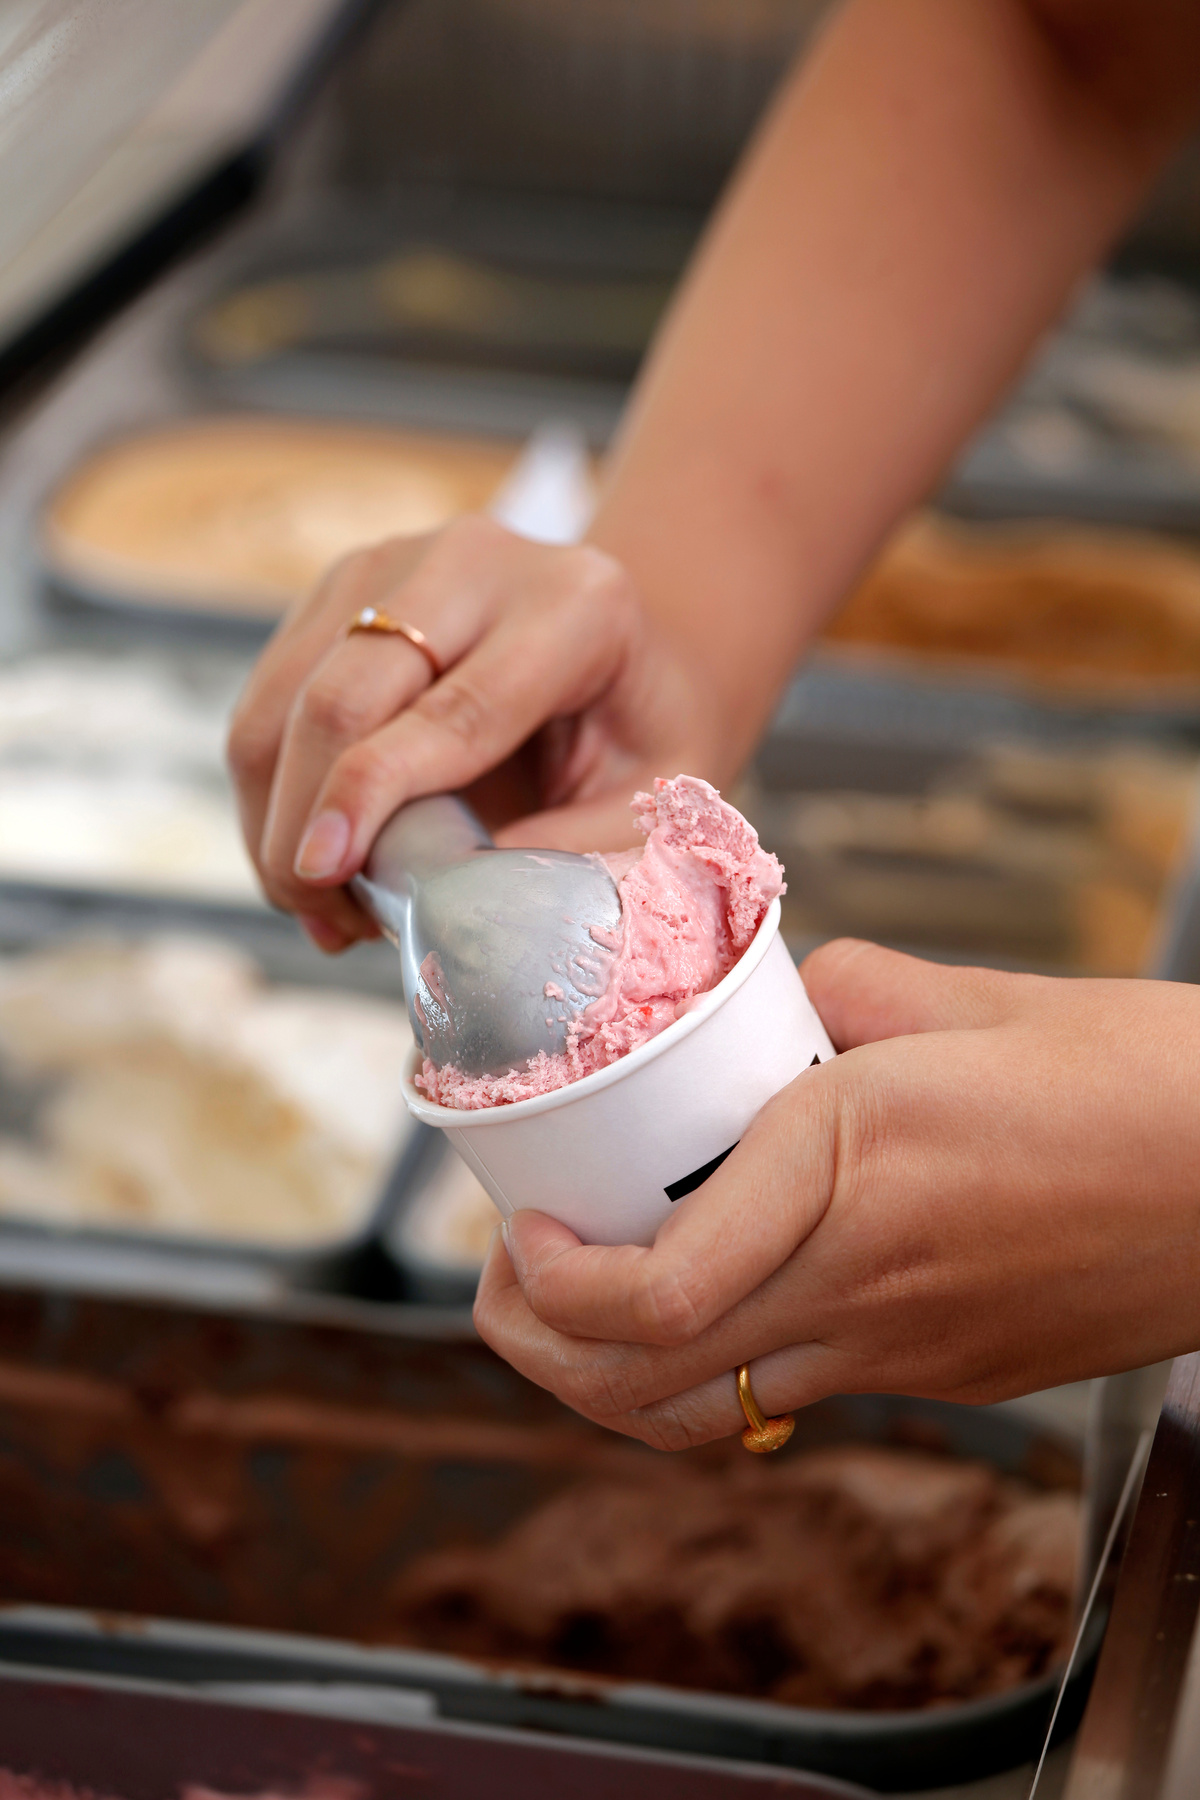 Hand scooping ice-cream to the cup